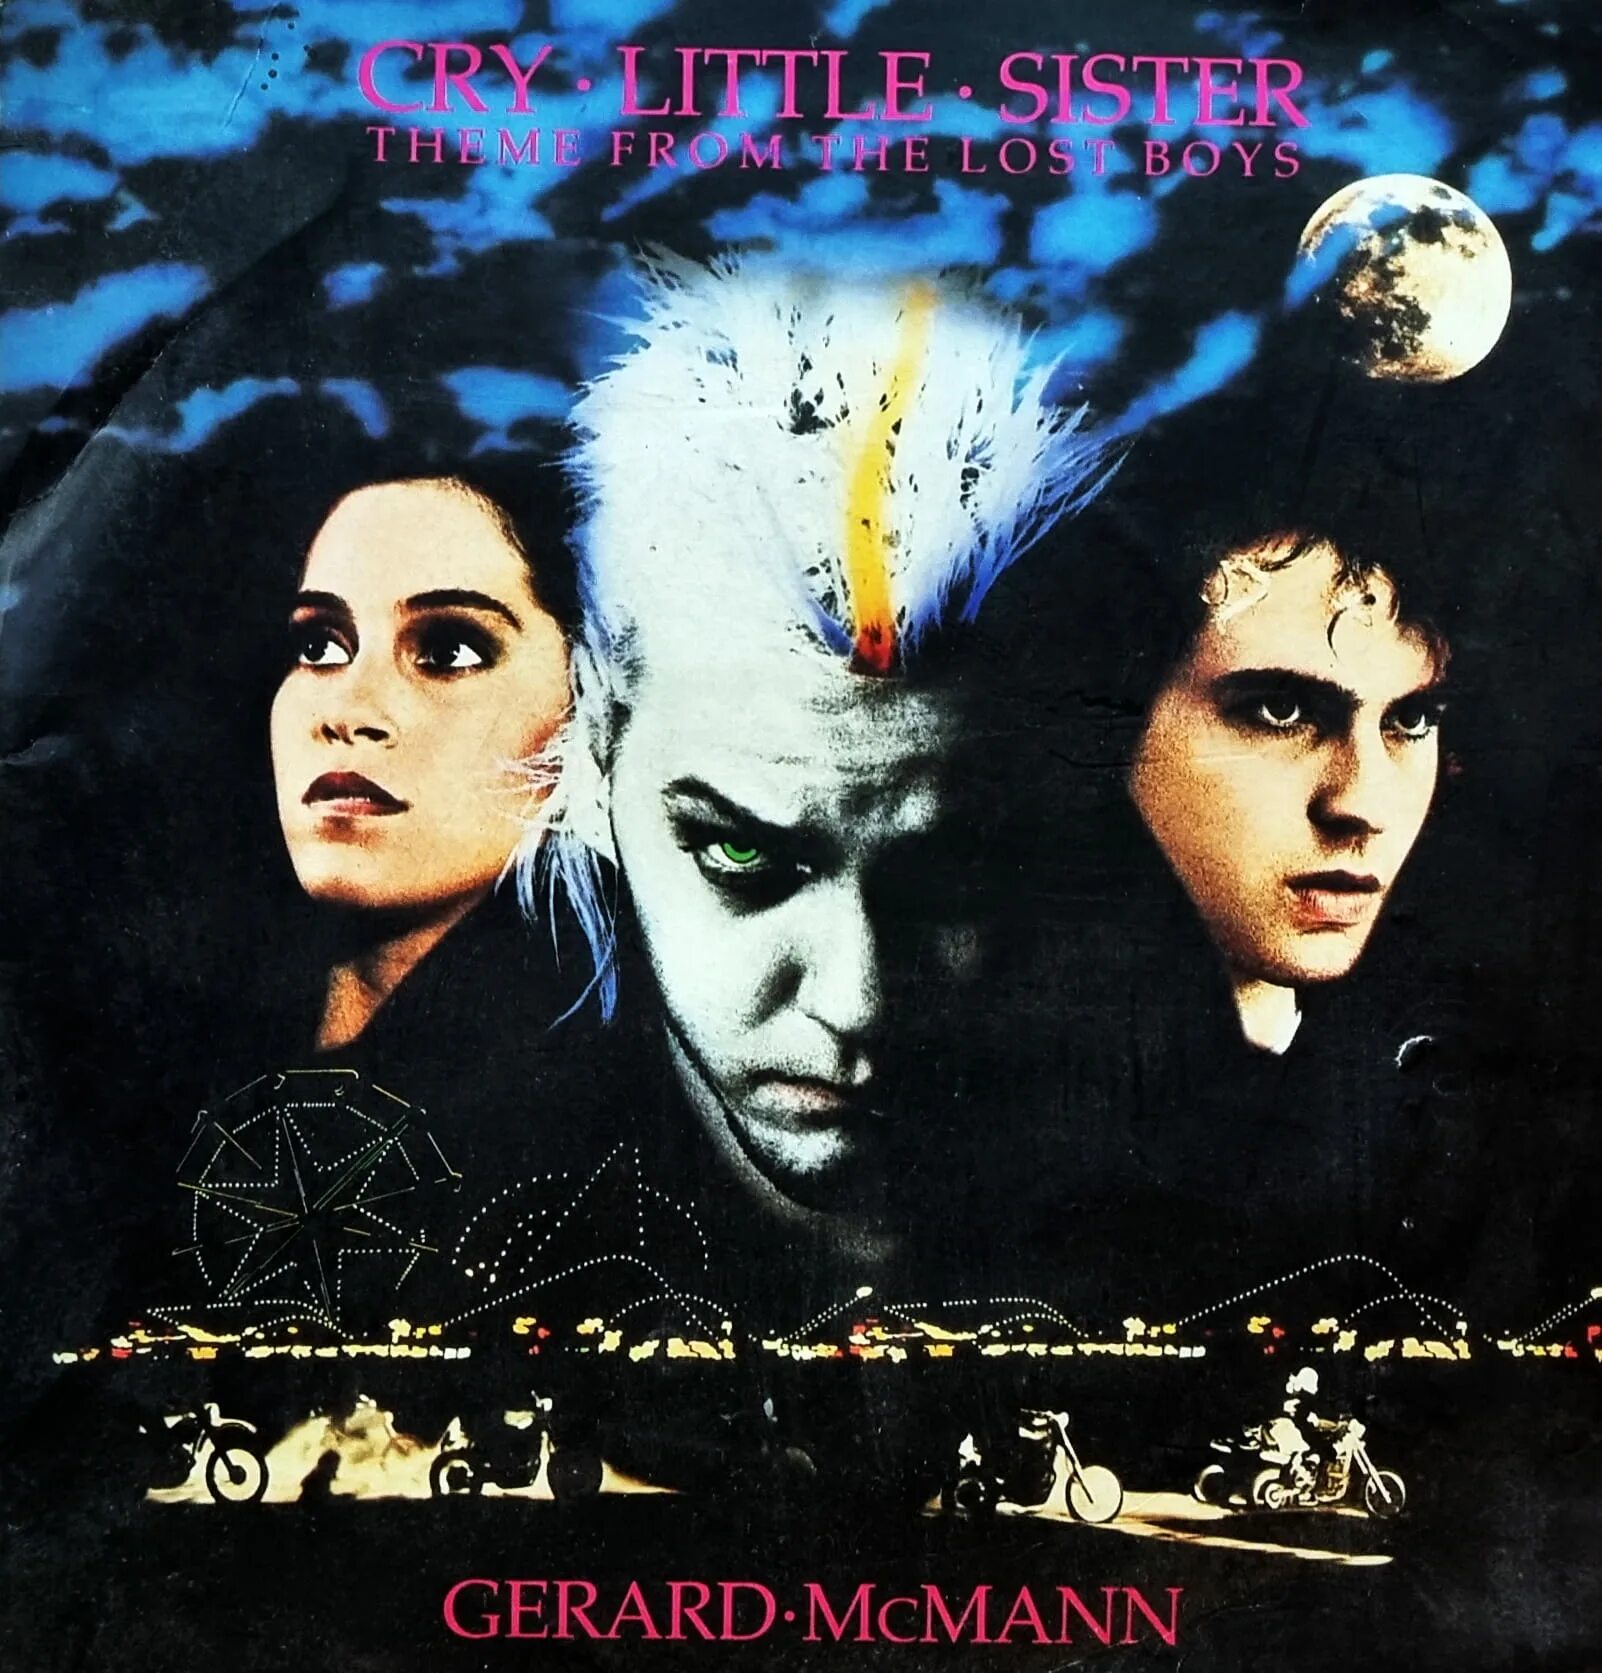 Gerard MCMANN. Sister, sister (1987). Theme from the Lost boys. Cry little sister из какой игры.